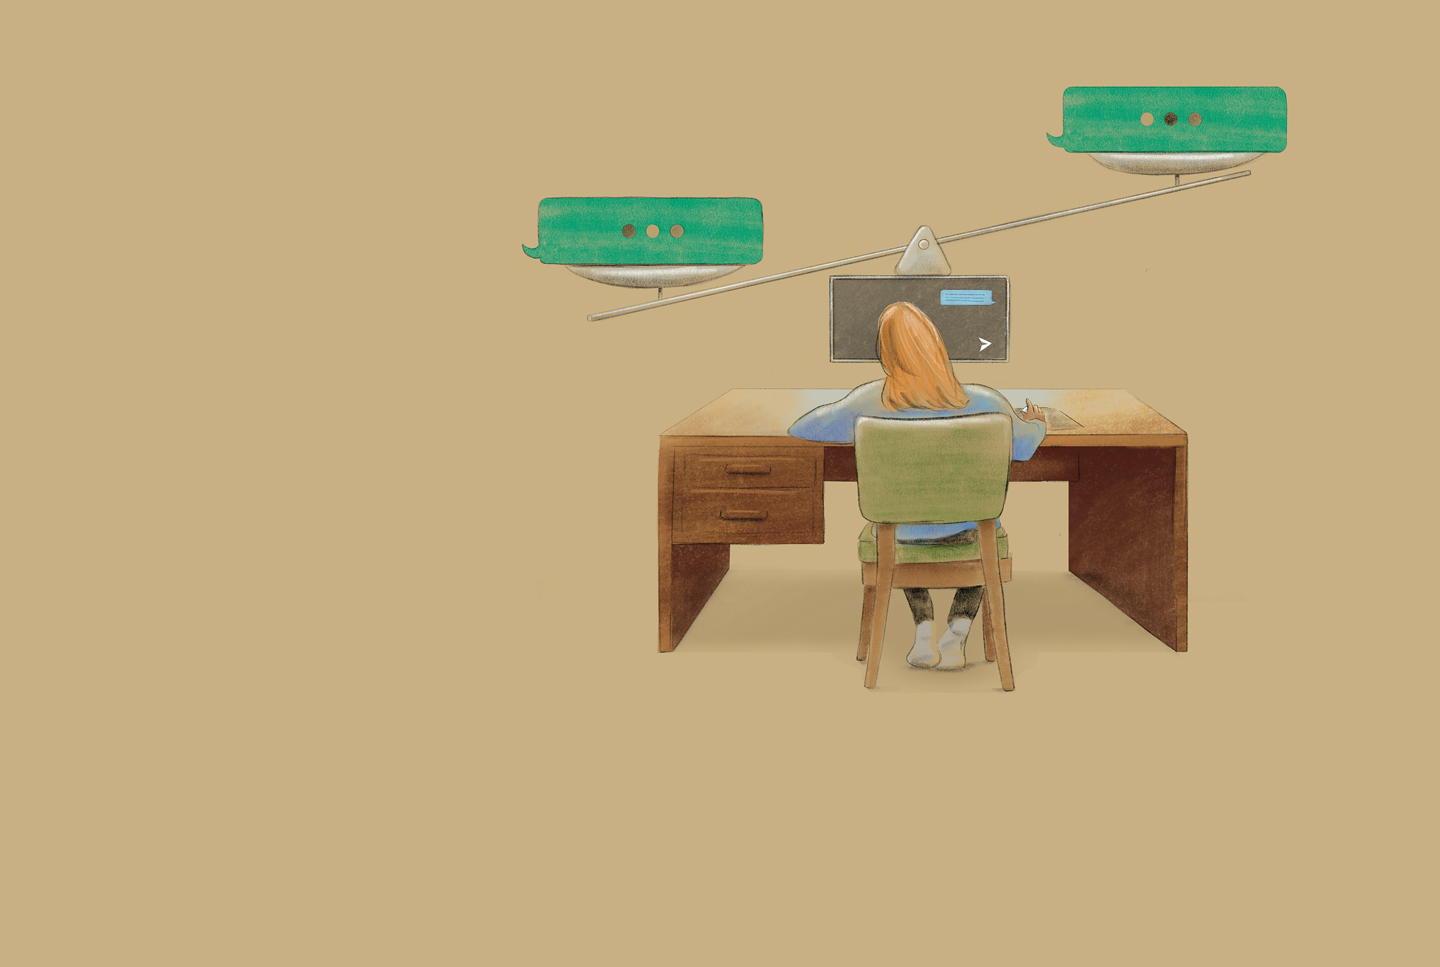 Illustration of a person working at a computer with two "chats" overhead on a scale, tilting the balance in one direction